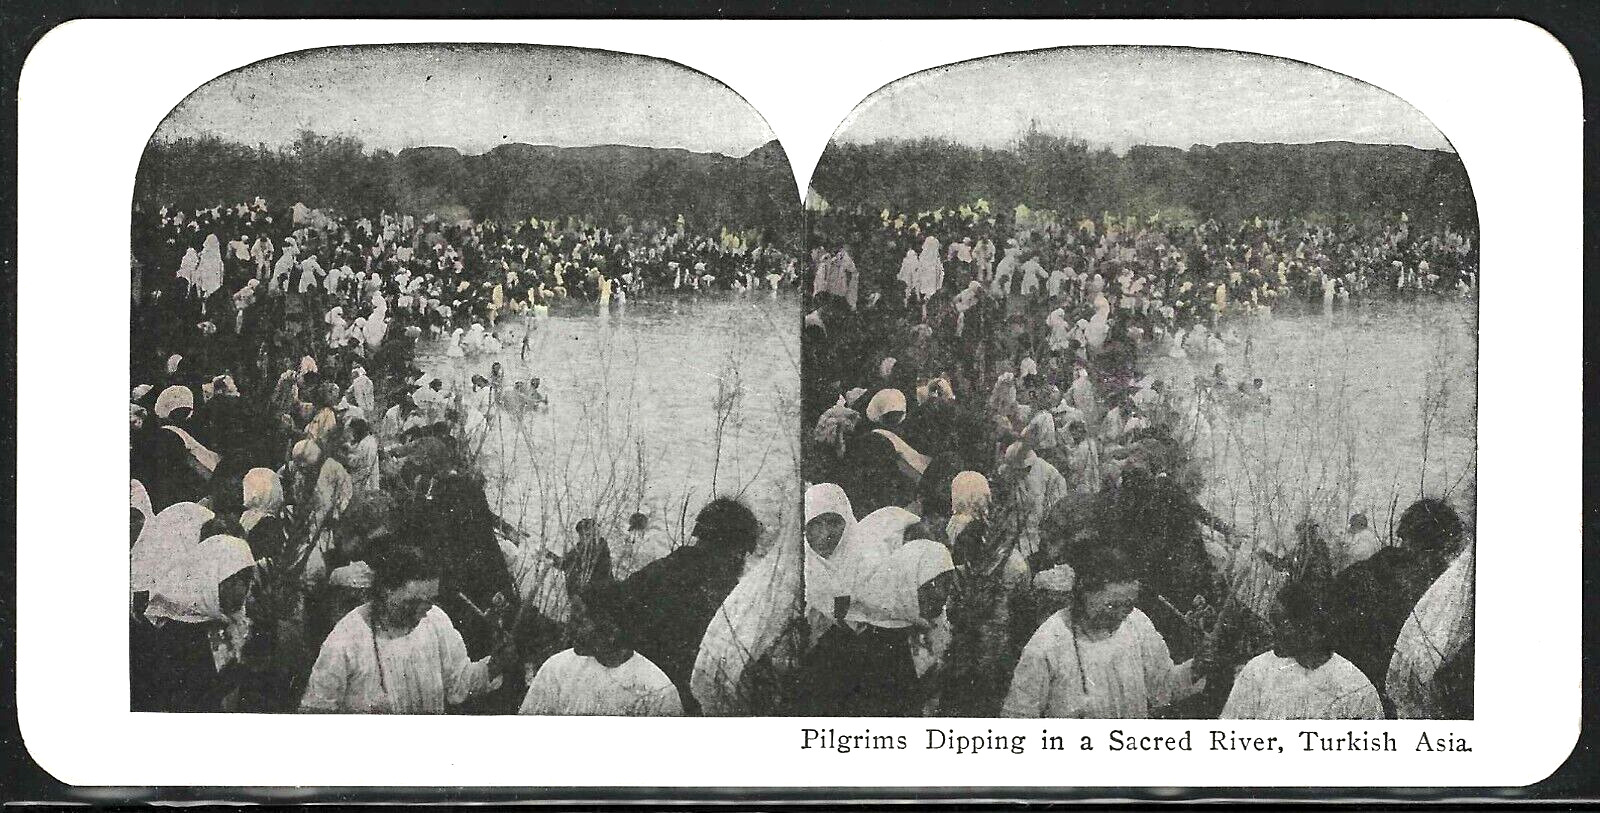 Pilgrims Dipping in a Sacred River, Turkey, Hand Colored Stereographic View Card